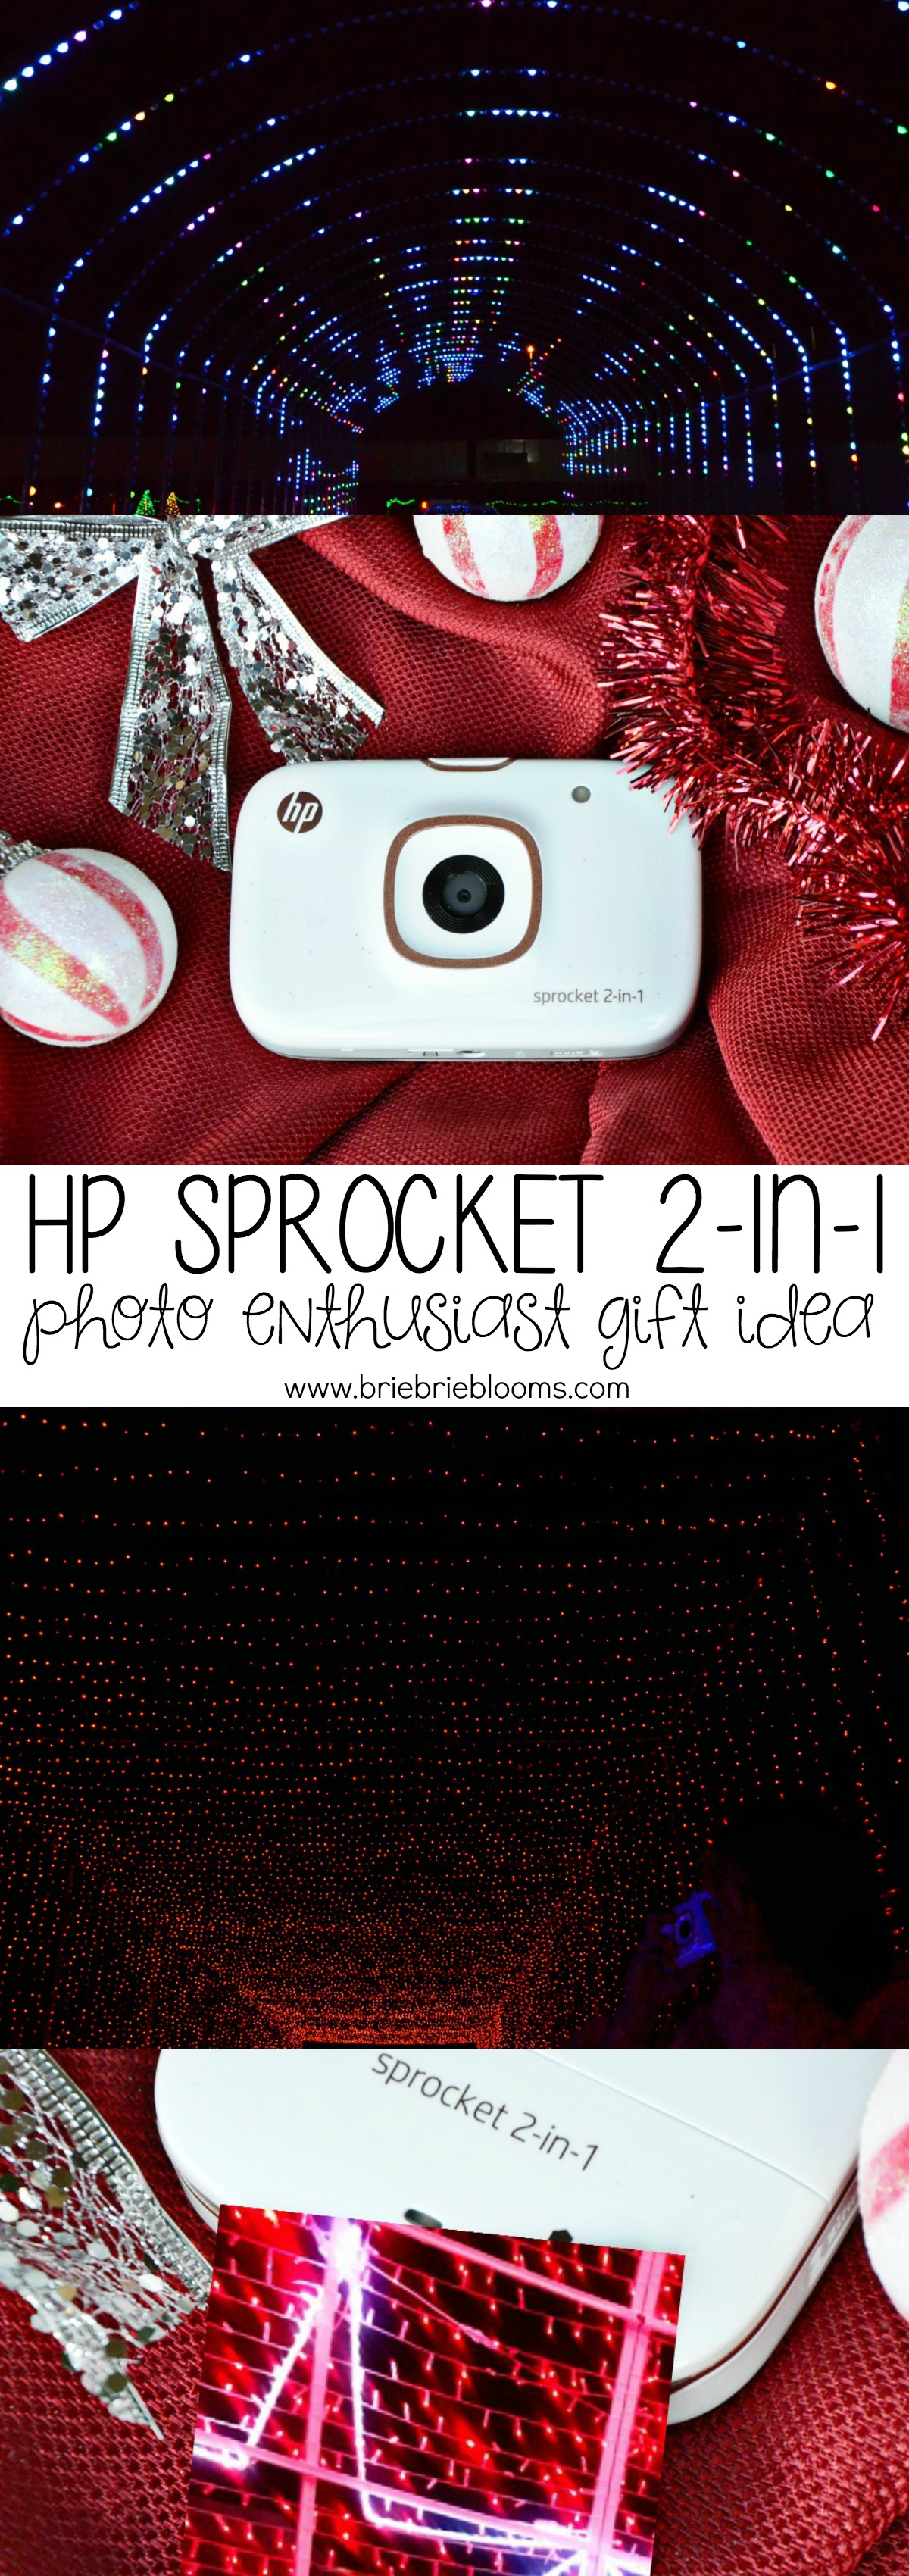 The HP Sprocket 2-in-1 is a pocket size printer with built in 5 MP camera the perfect photo enthusiast gift idea for family and friends.